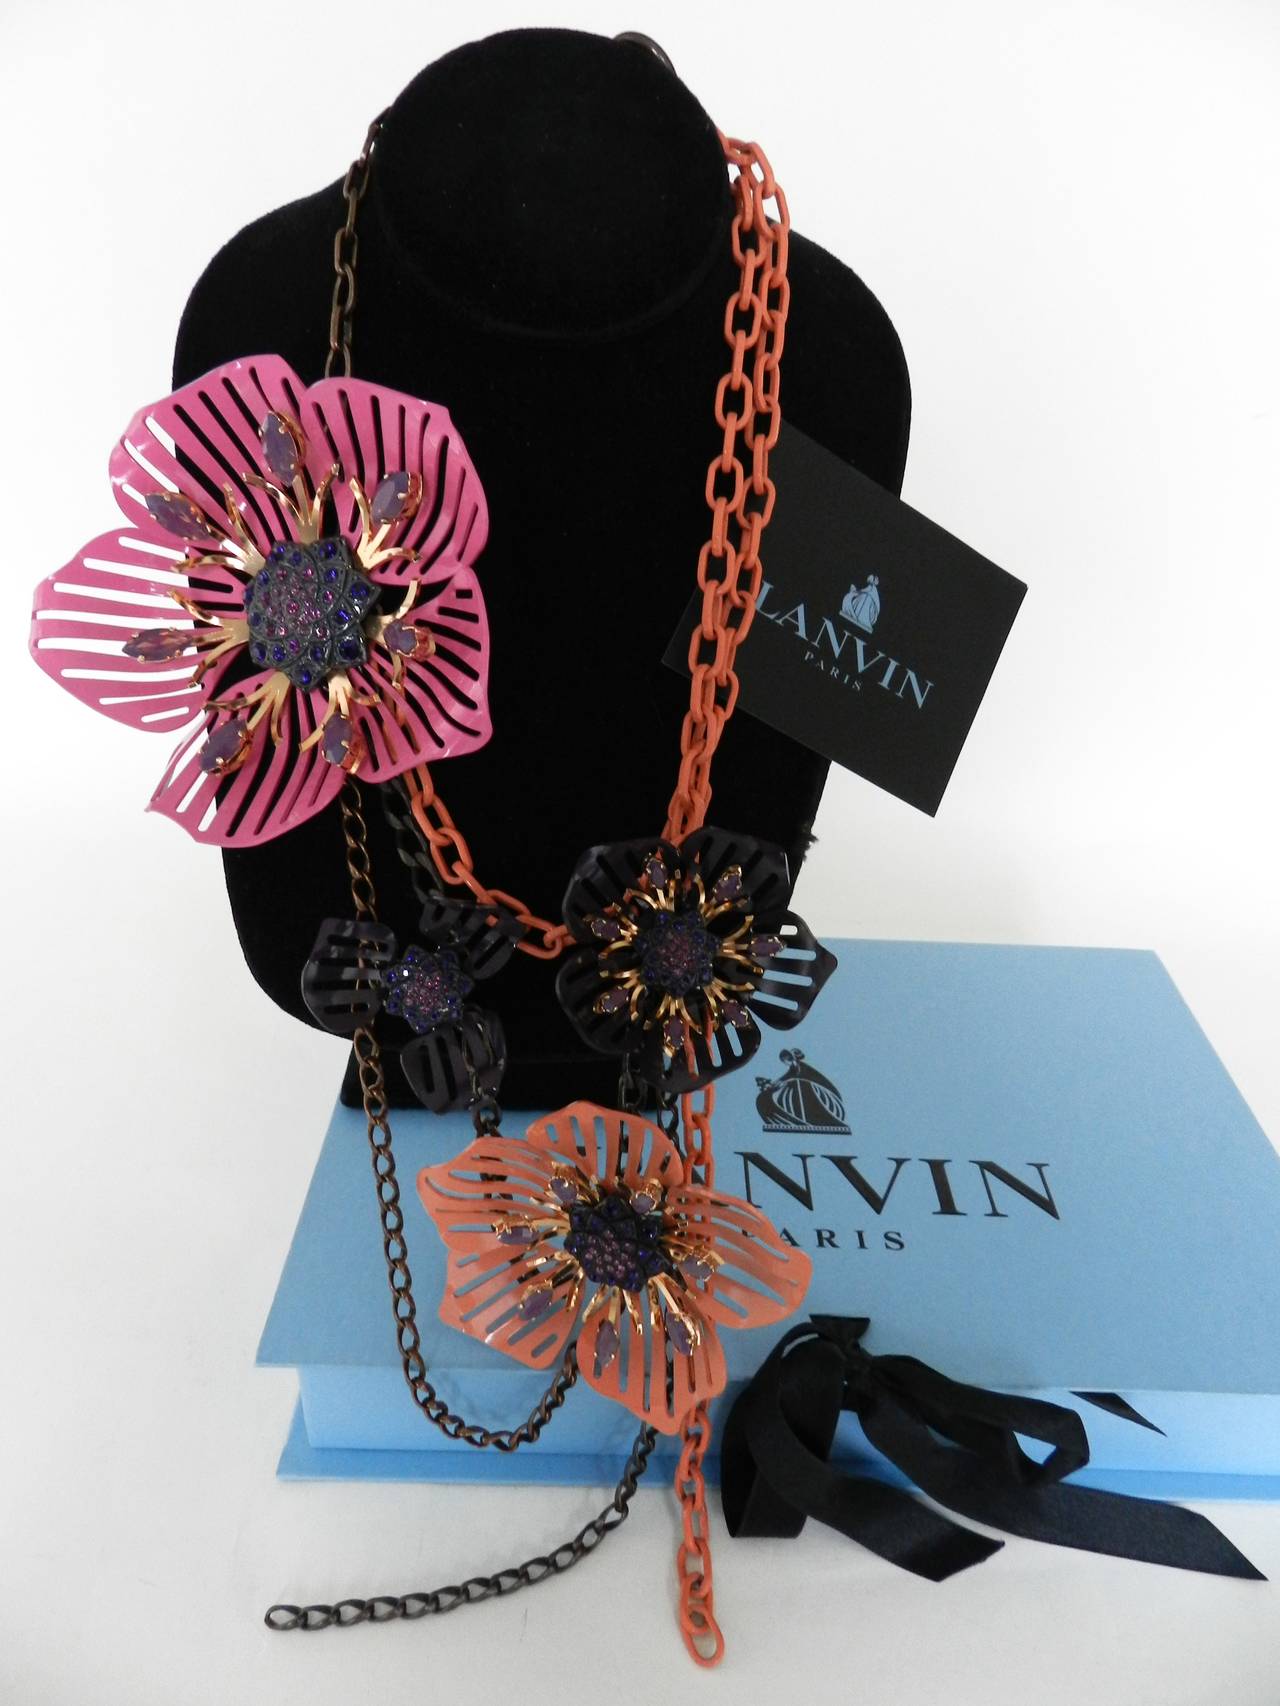 Lanvin pink and brown enamel flower necklace with rhinestones. Excellent condition – worn once. With box and cards. Shortest drop is 10” and longest is 15”. Largest flower is 4.5” x 4”. 

Shipping prices provided are for FedEx Ground to the US.